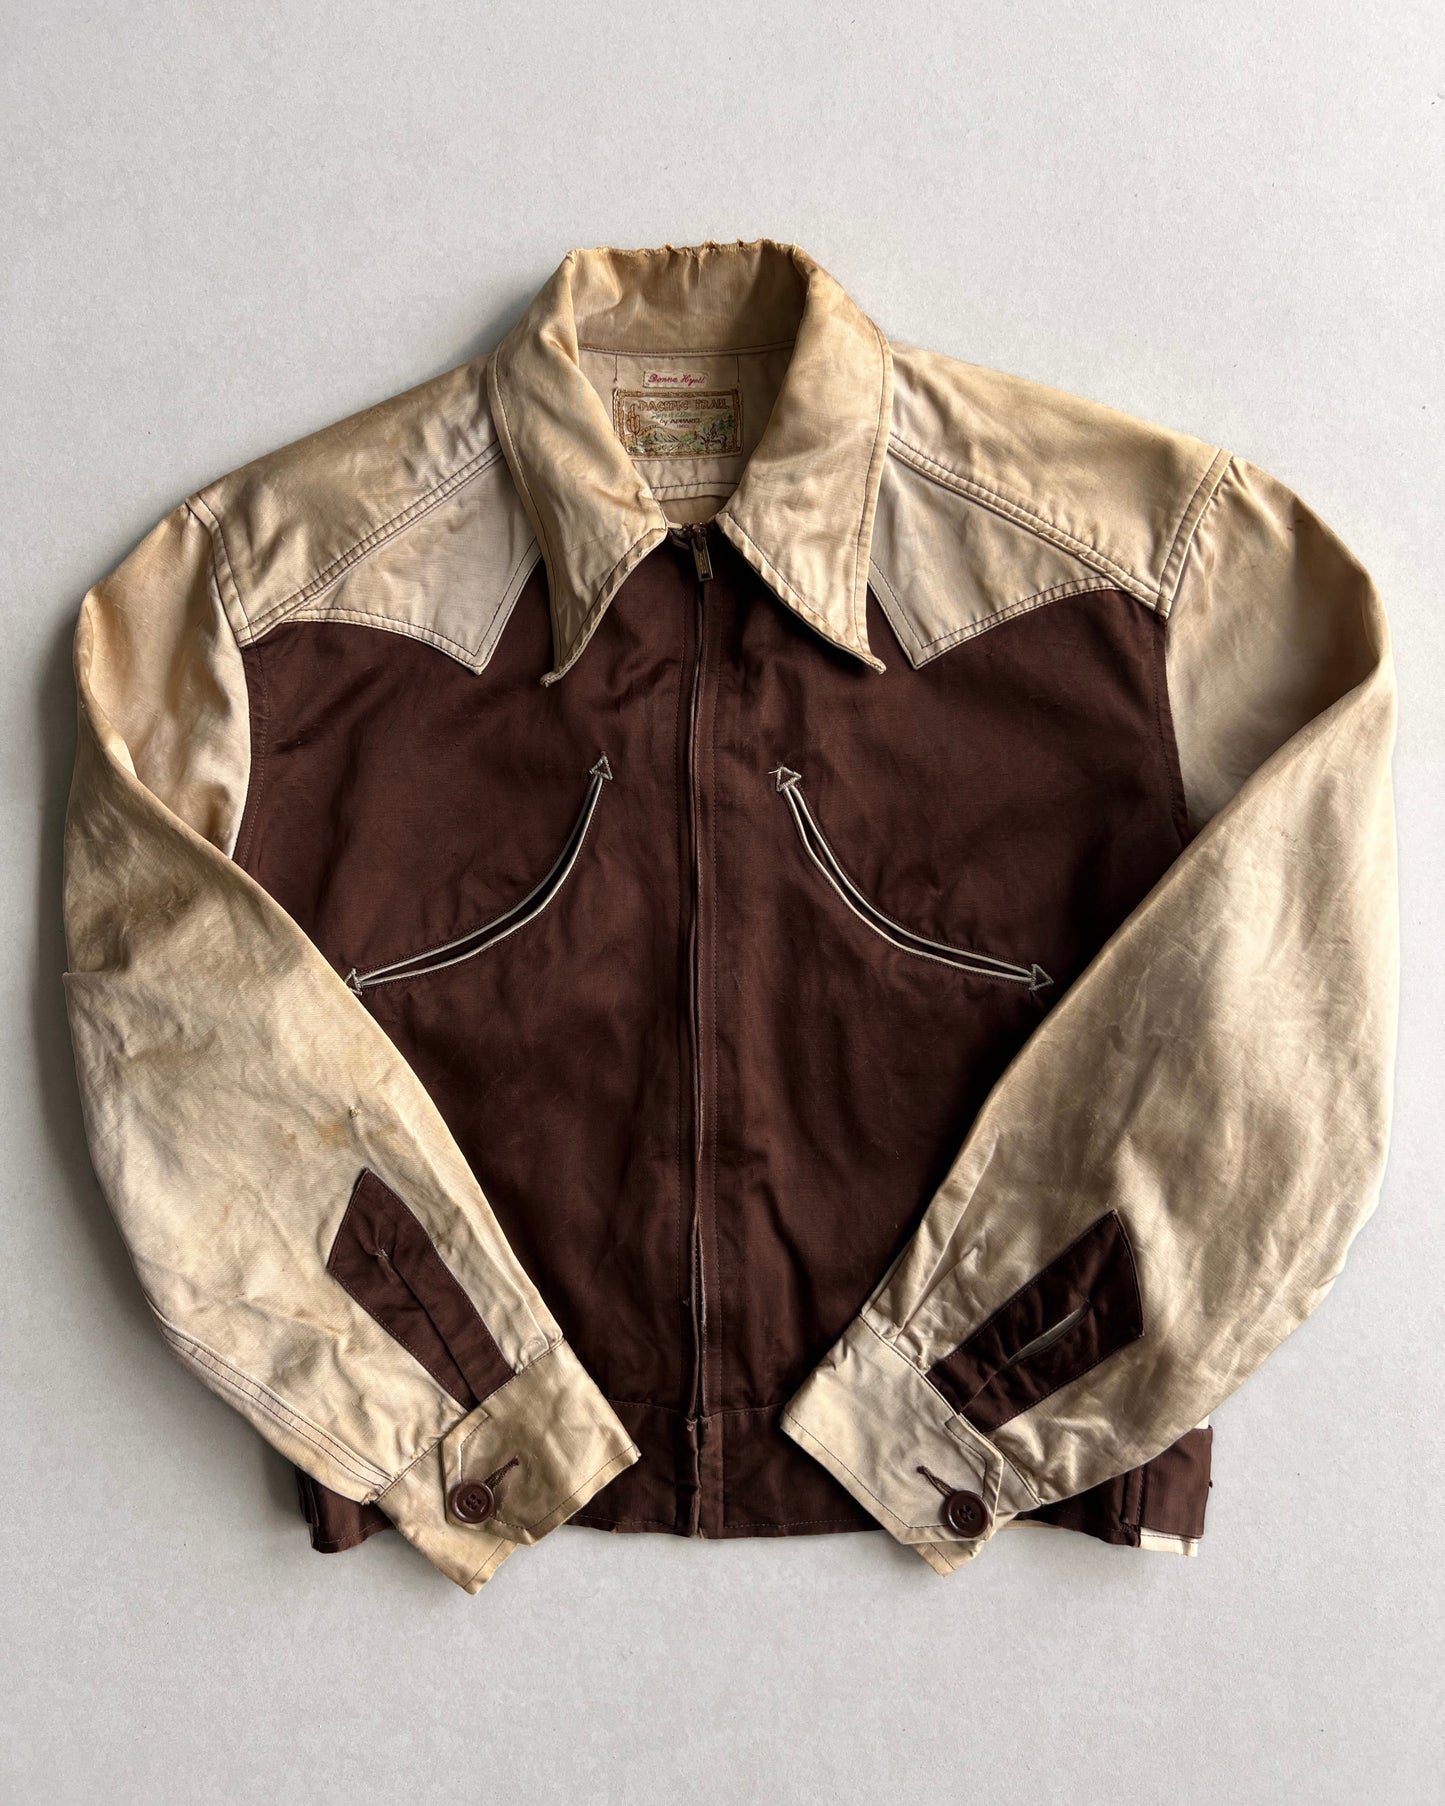 1930S/1940S PACIFIC TRIAL WESTERN ZIP-UP JACKET (L)